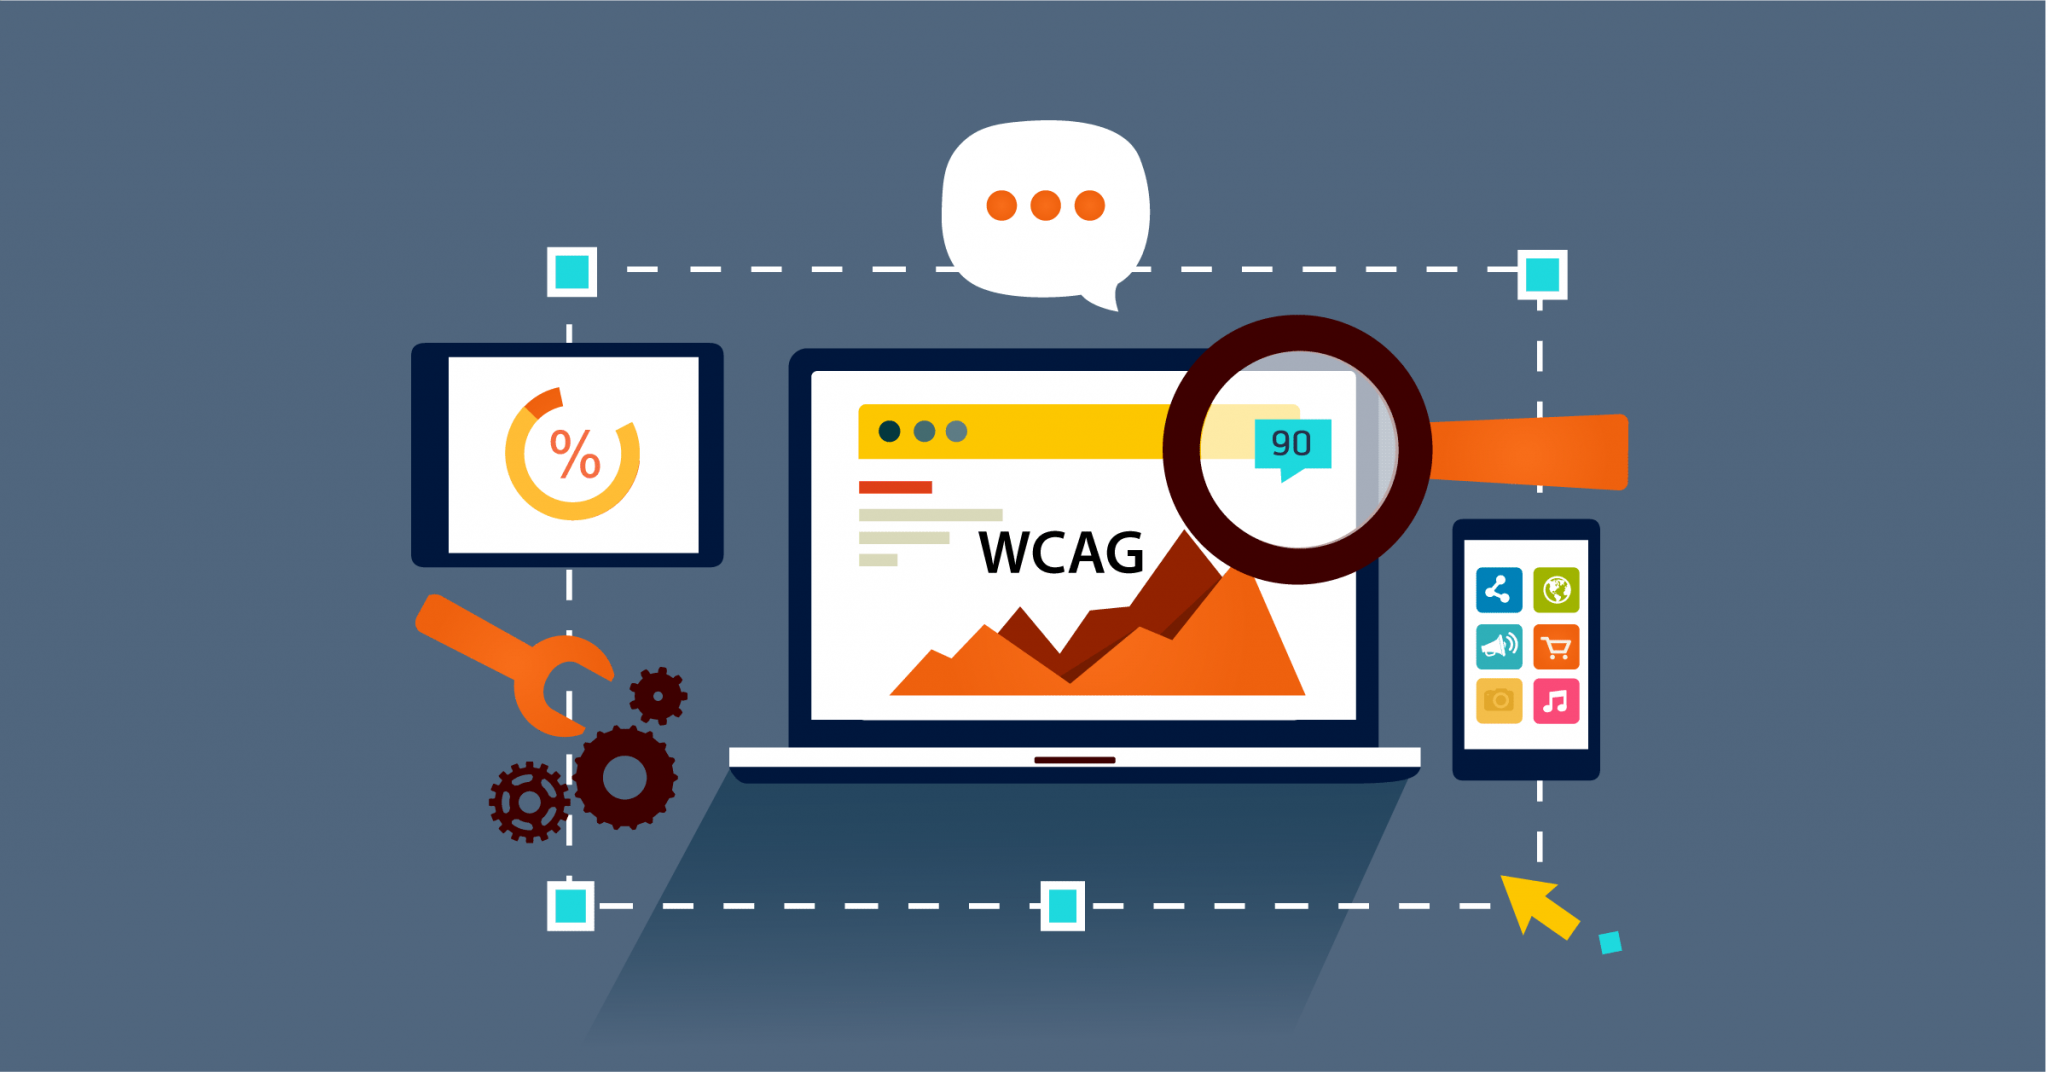 Illustrated webinar design showing digital tools and devices, with WCAG on the main laptop.